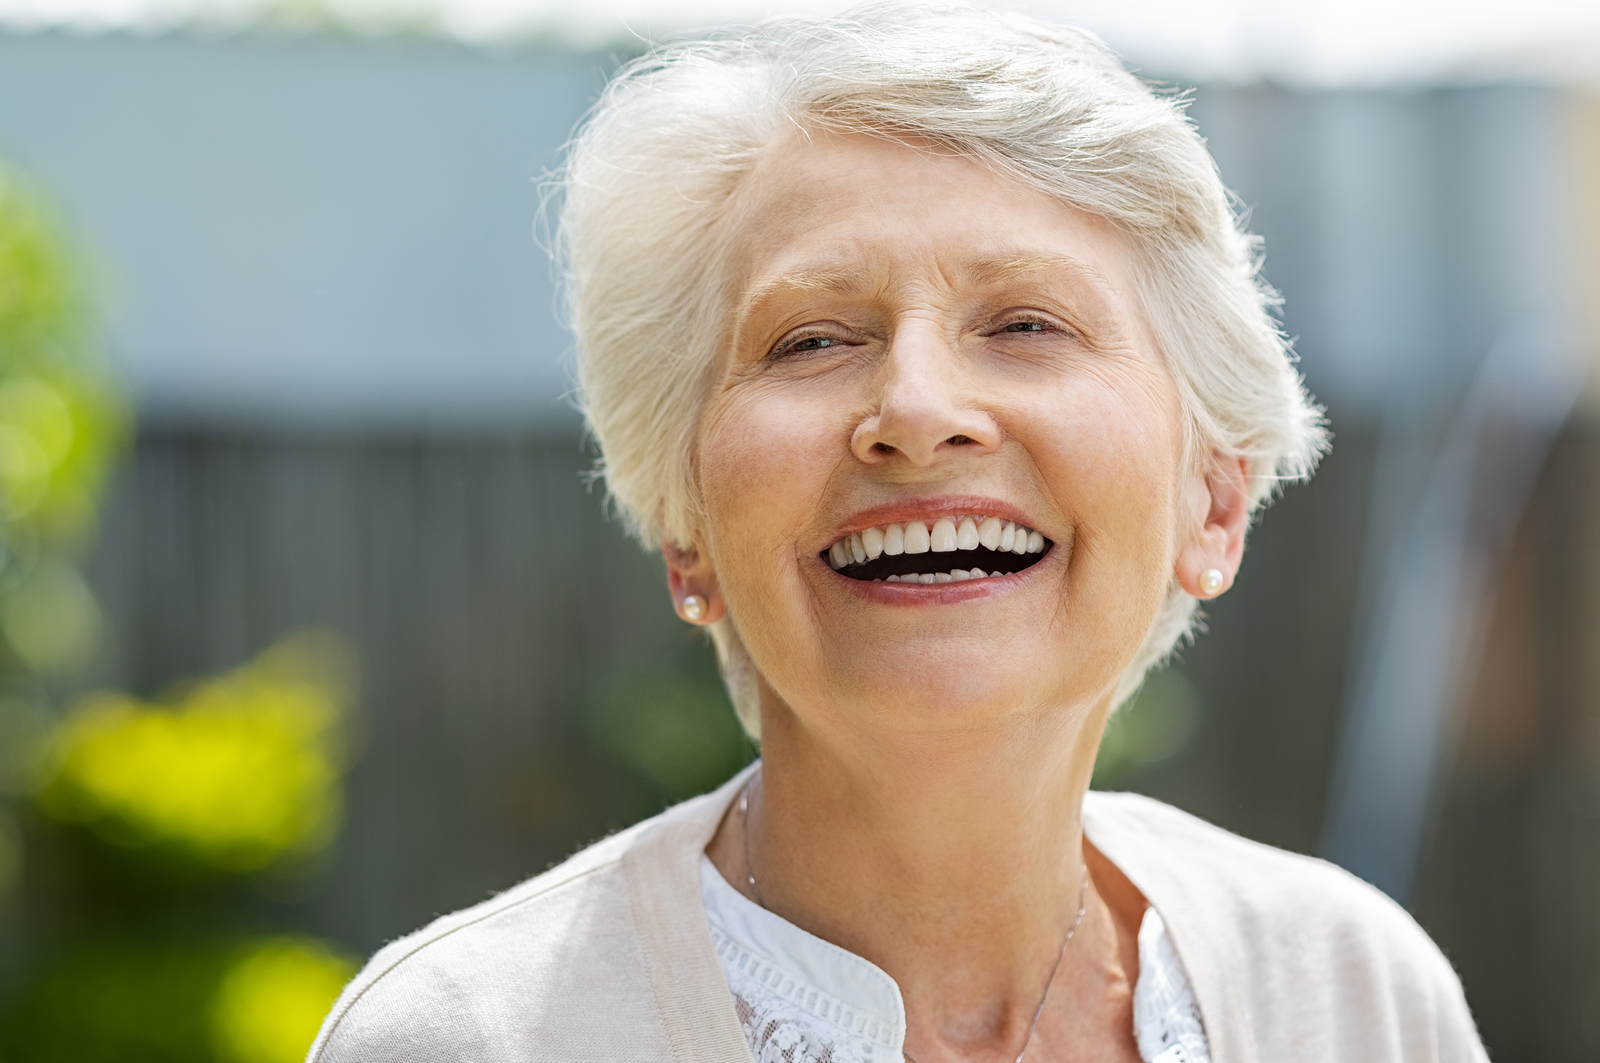 Smiling In Your Seventies And Beyond: Dental Implants For Seniors